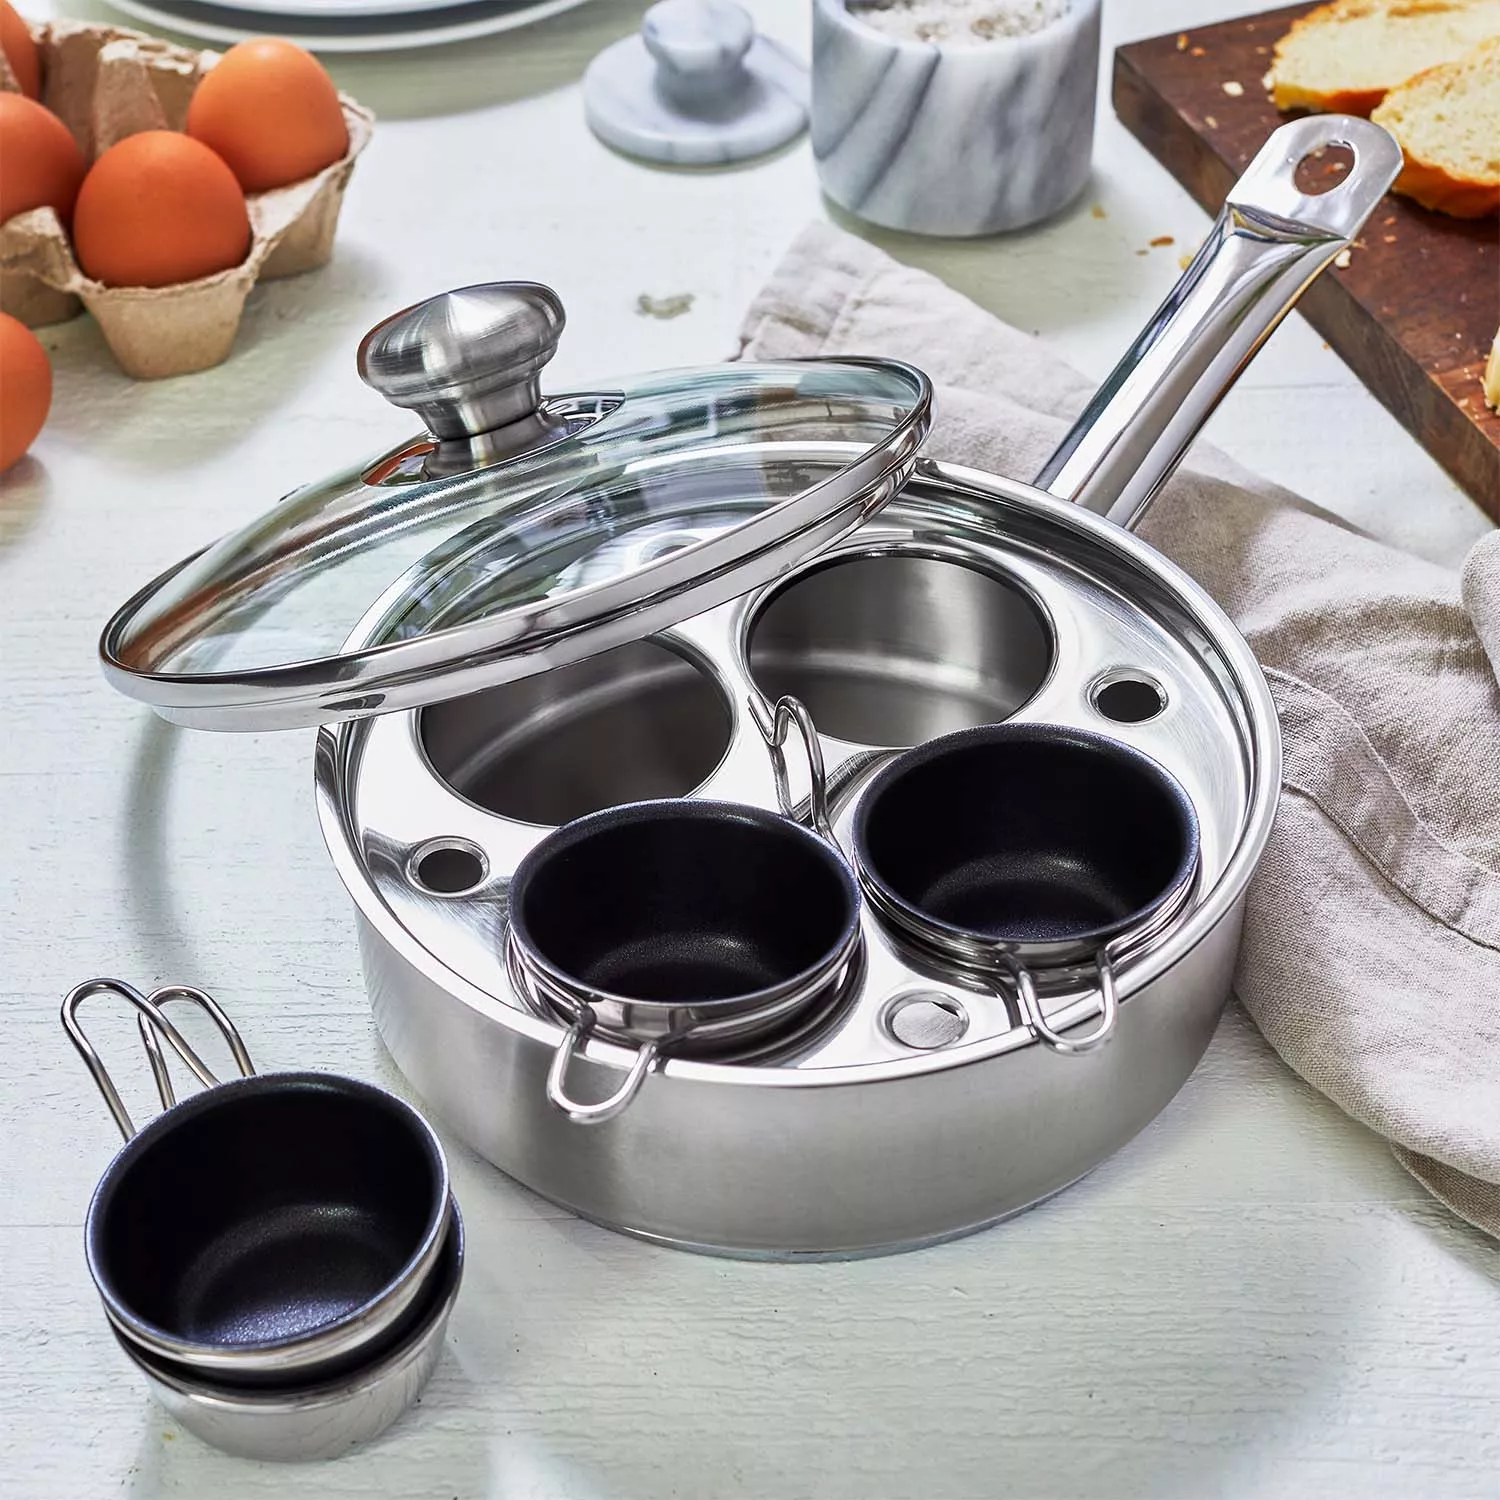 Egg Cup Holder Single Egg Holder, Egg Holder, Egg Trays Stainless Steel For  Household Kitchen 